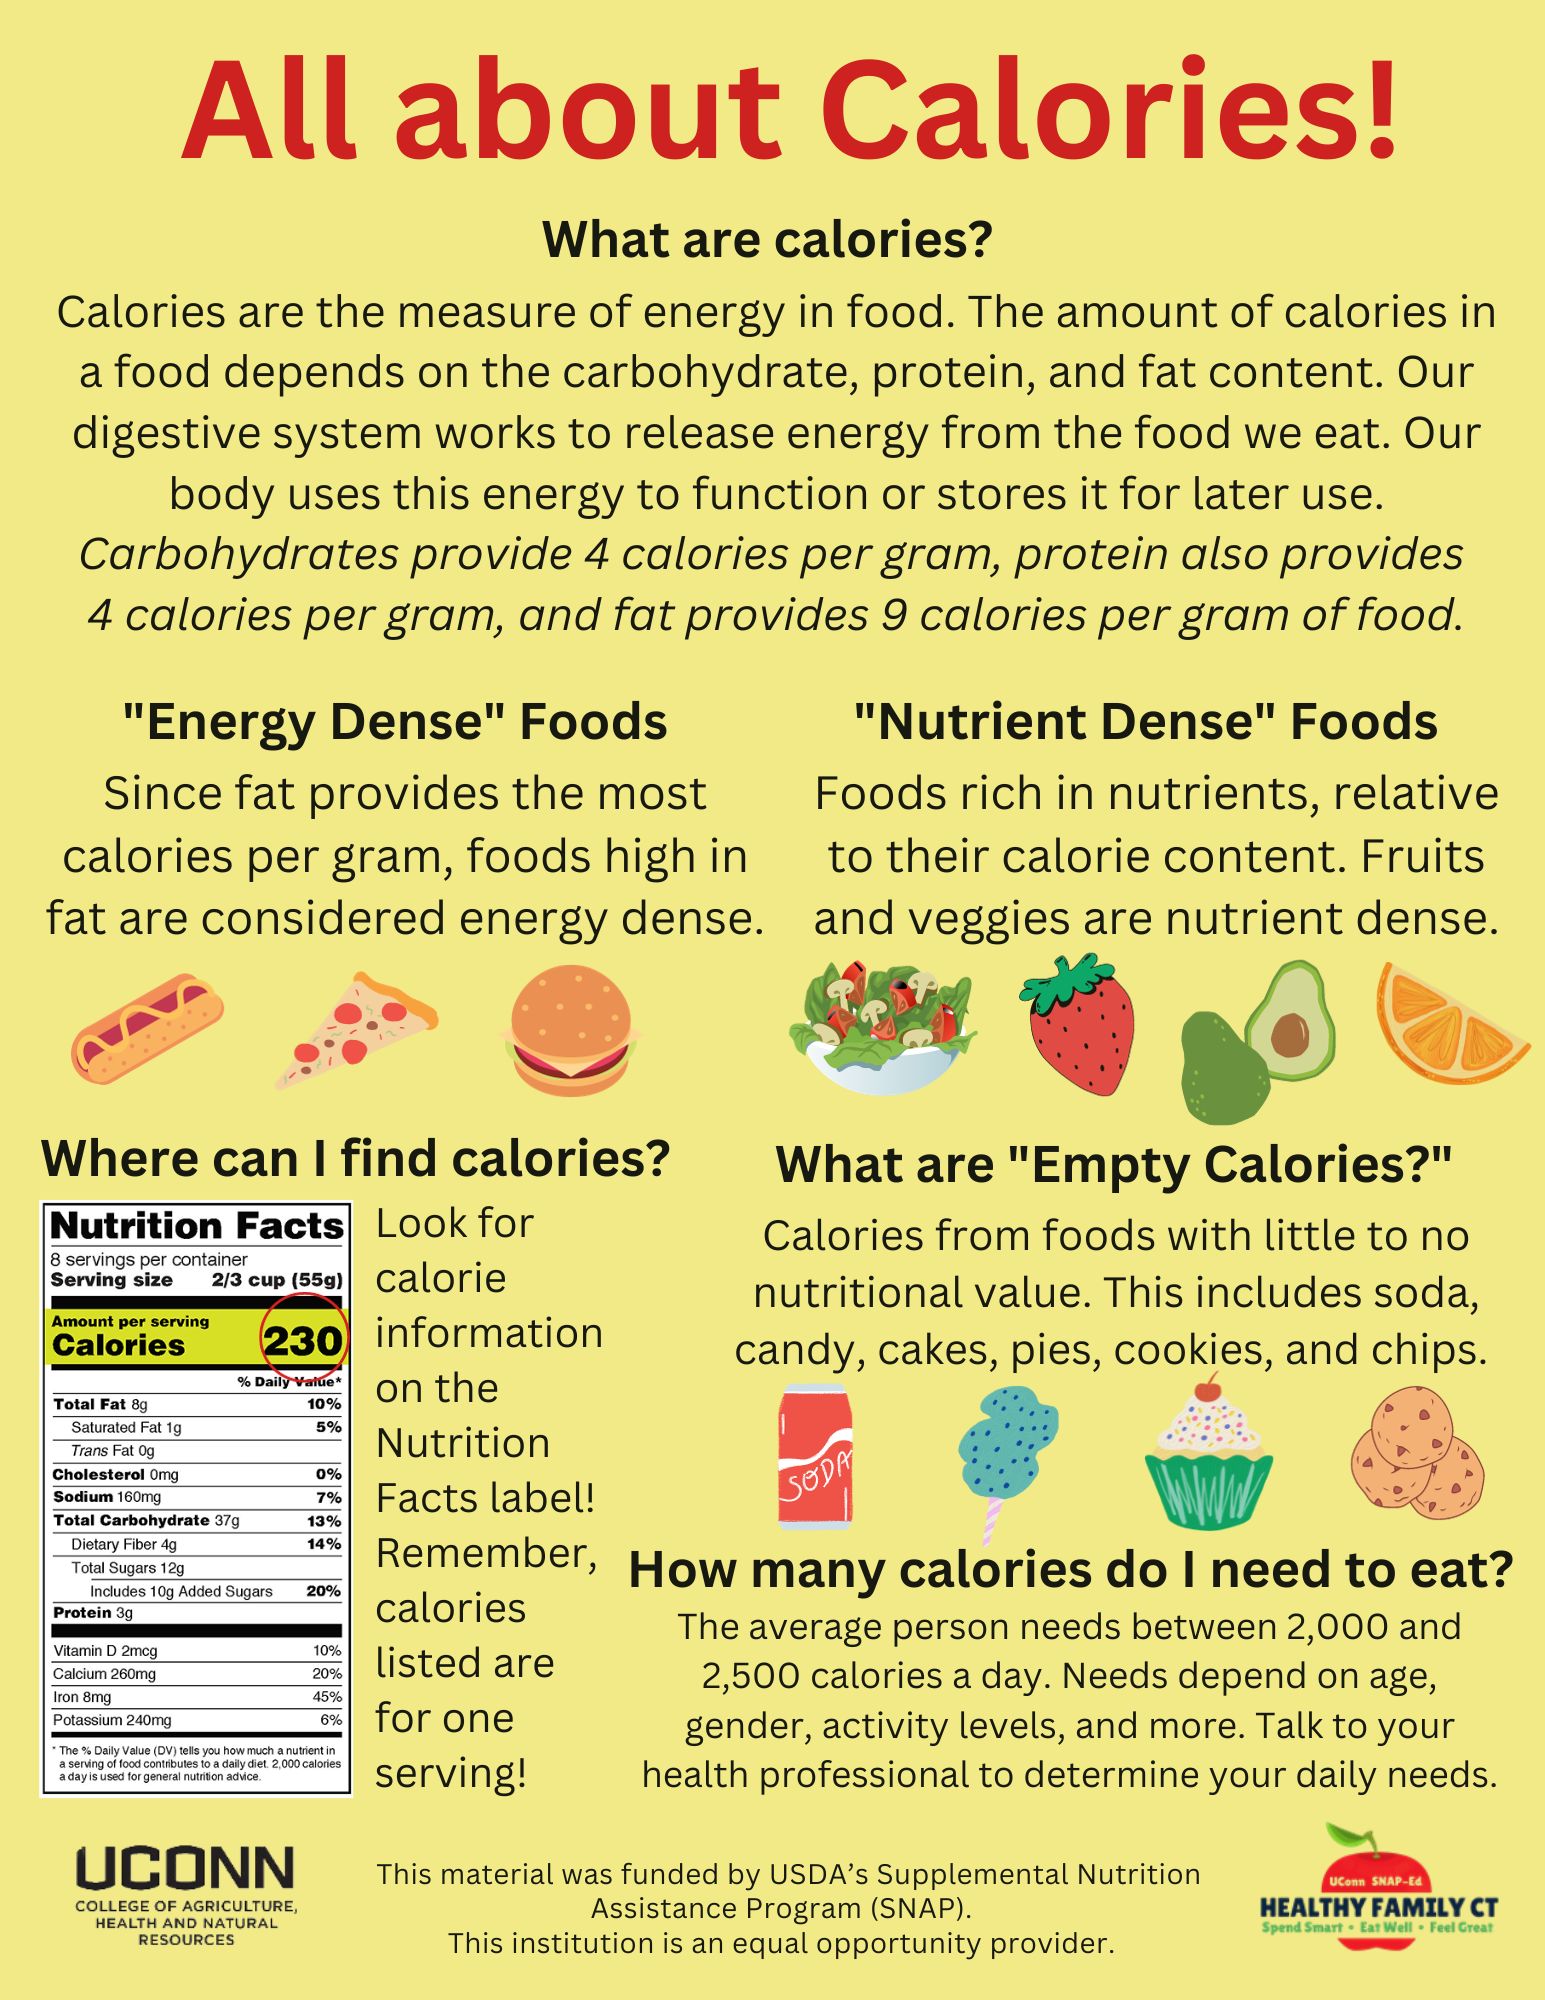 information on calories and image of a food label 